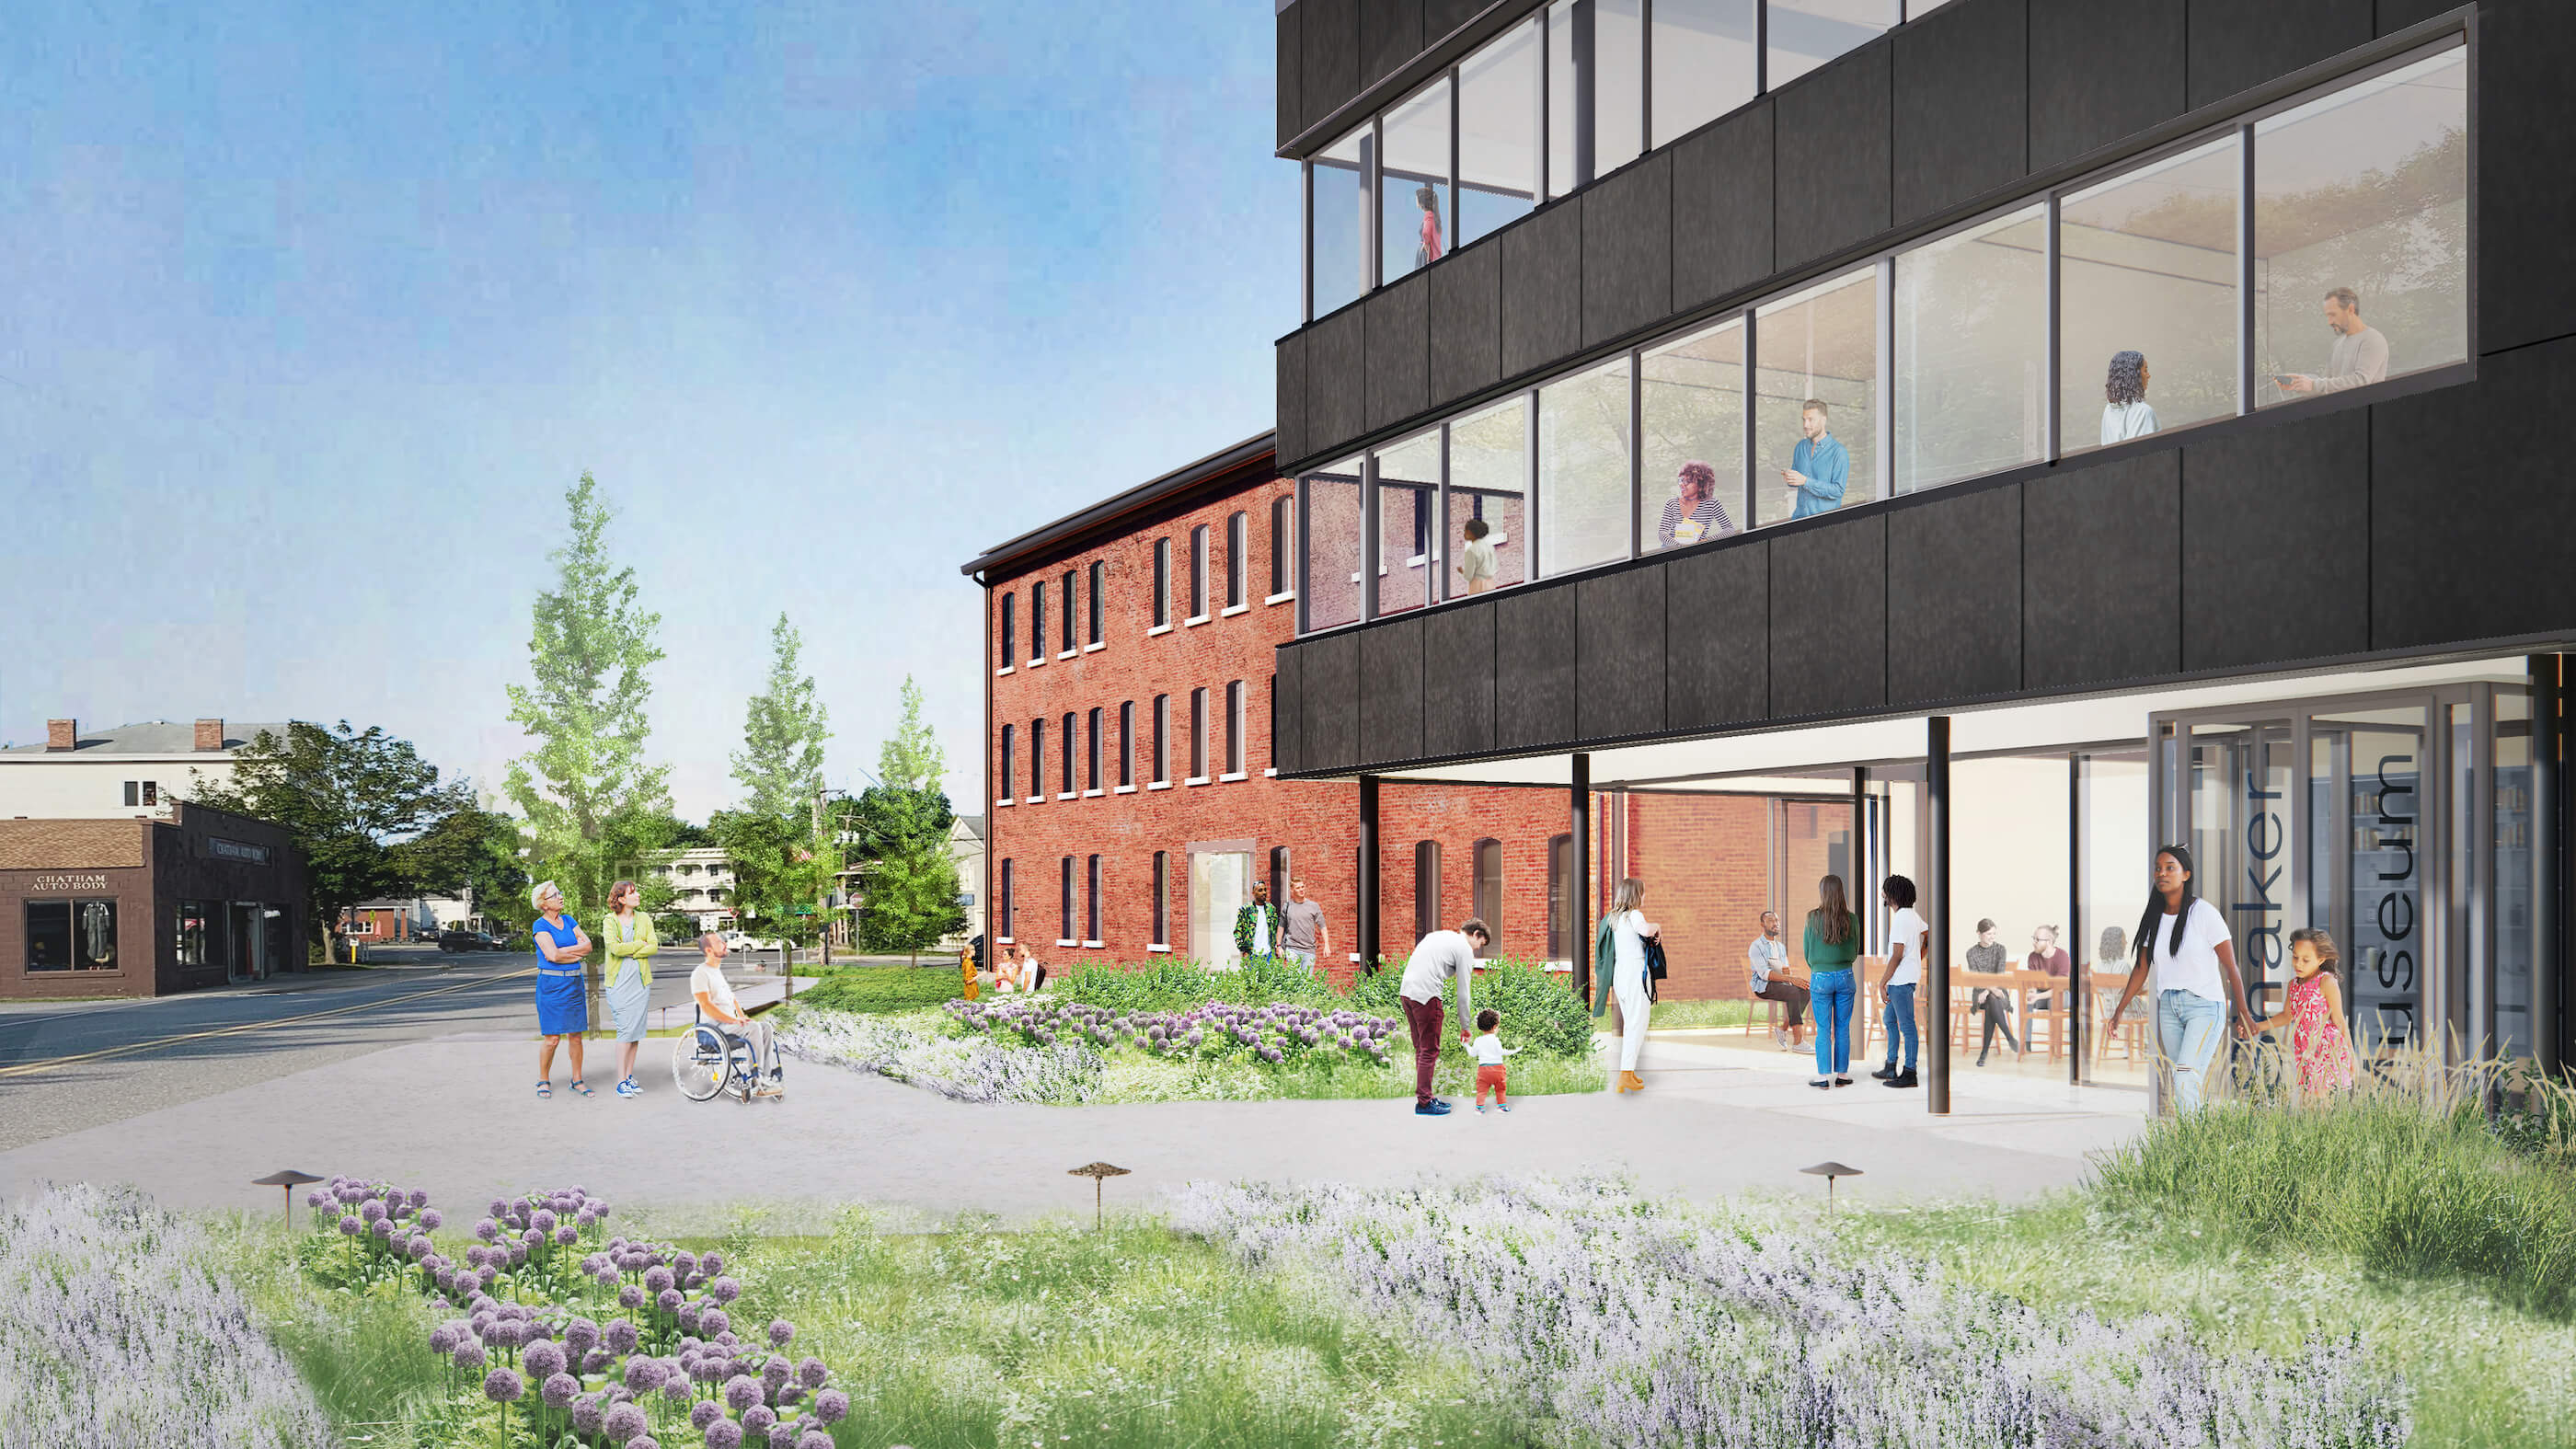 exterior rendering of a historic brick building with a modern new addition